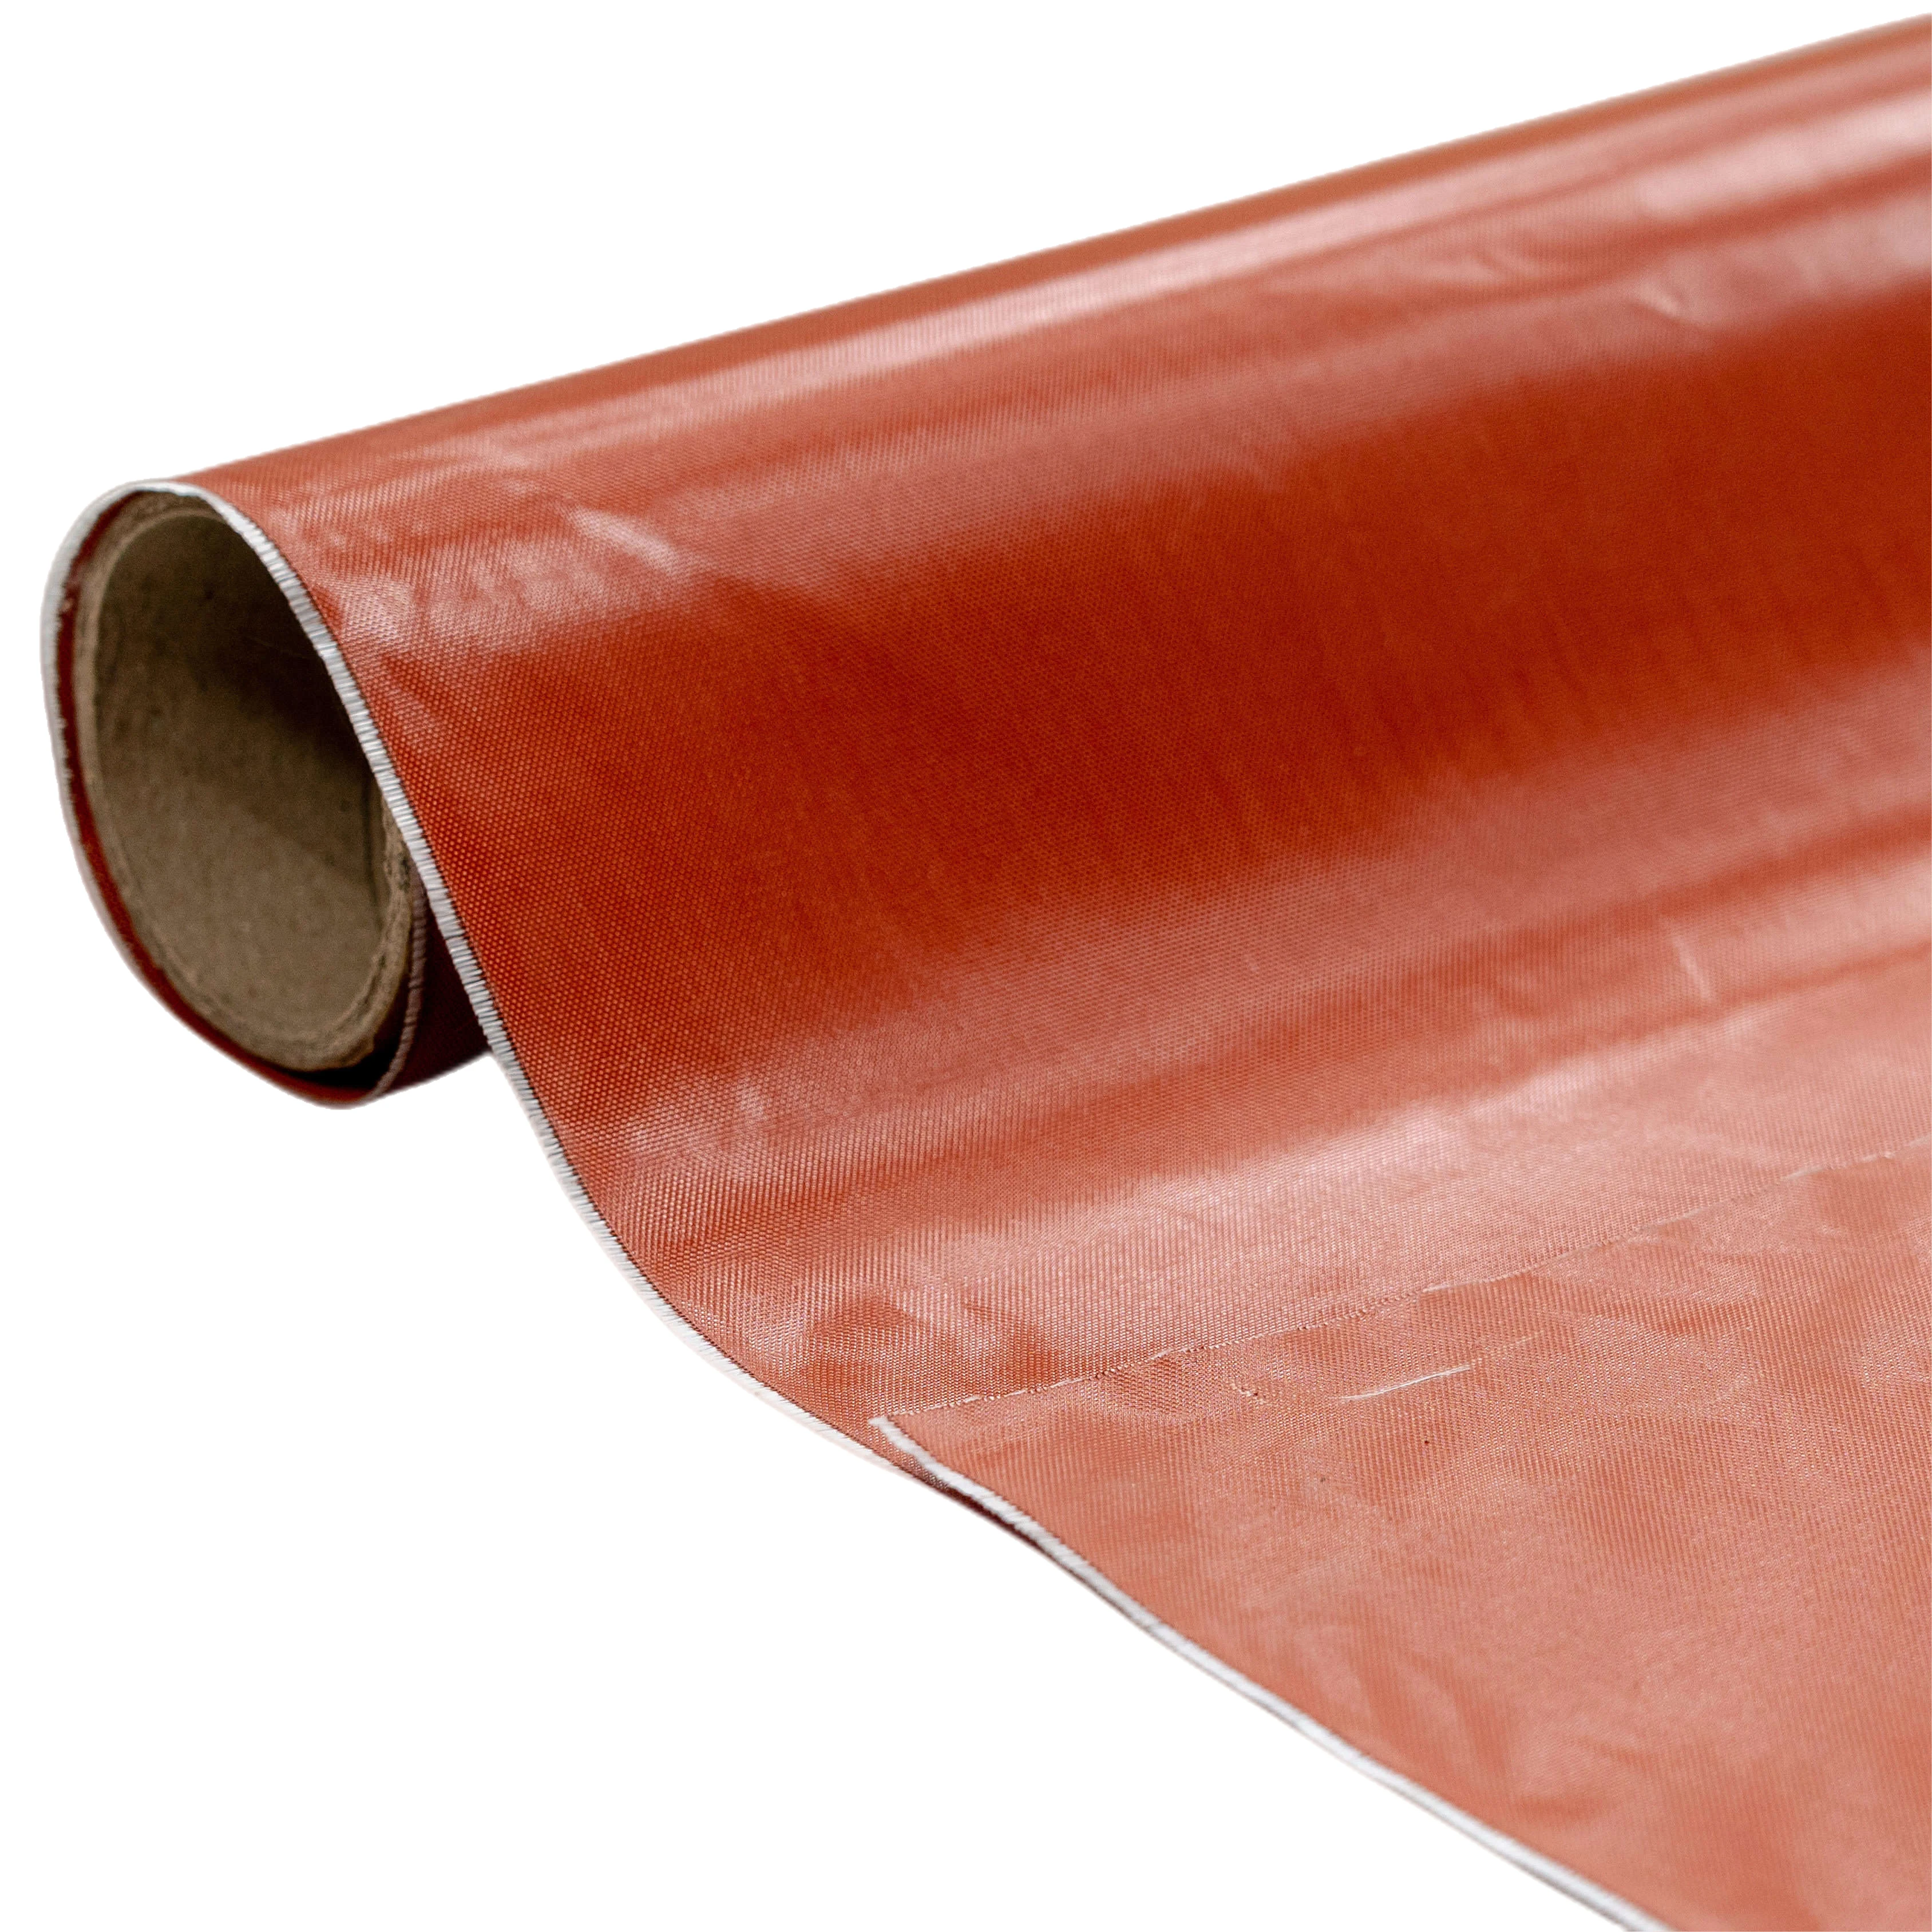 UL94 550c Flame Retardant Colored Silicone Fire Blanket Roll